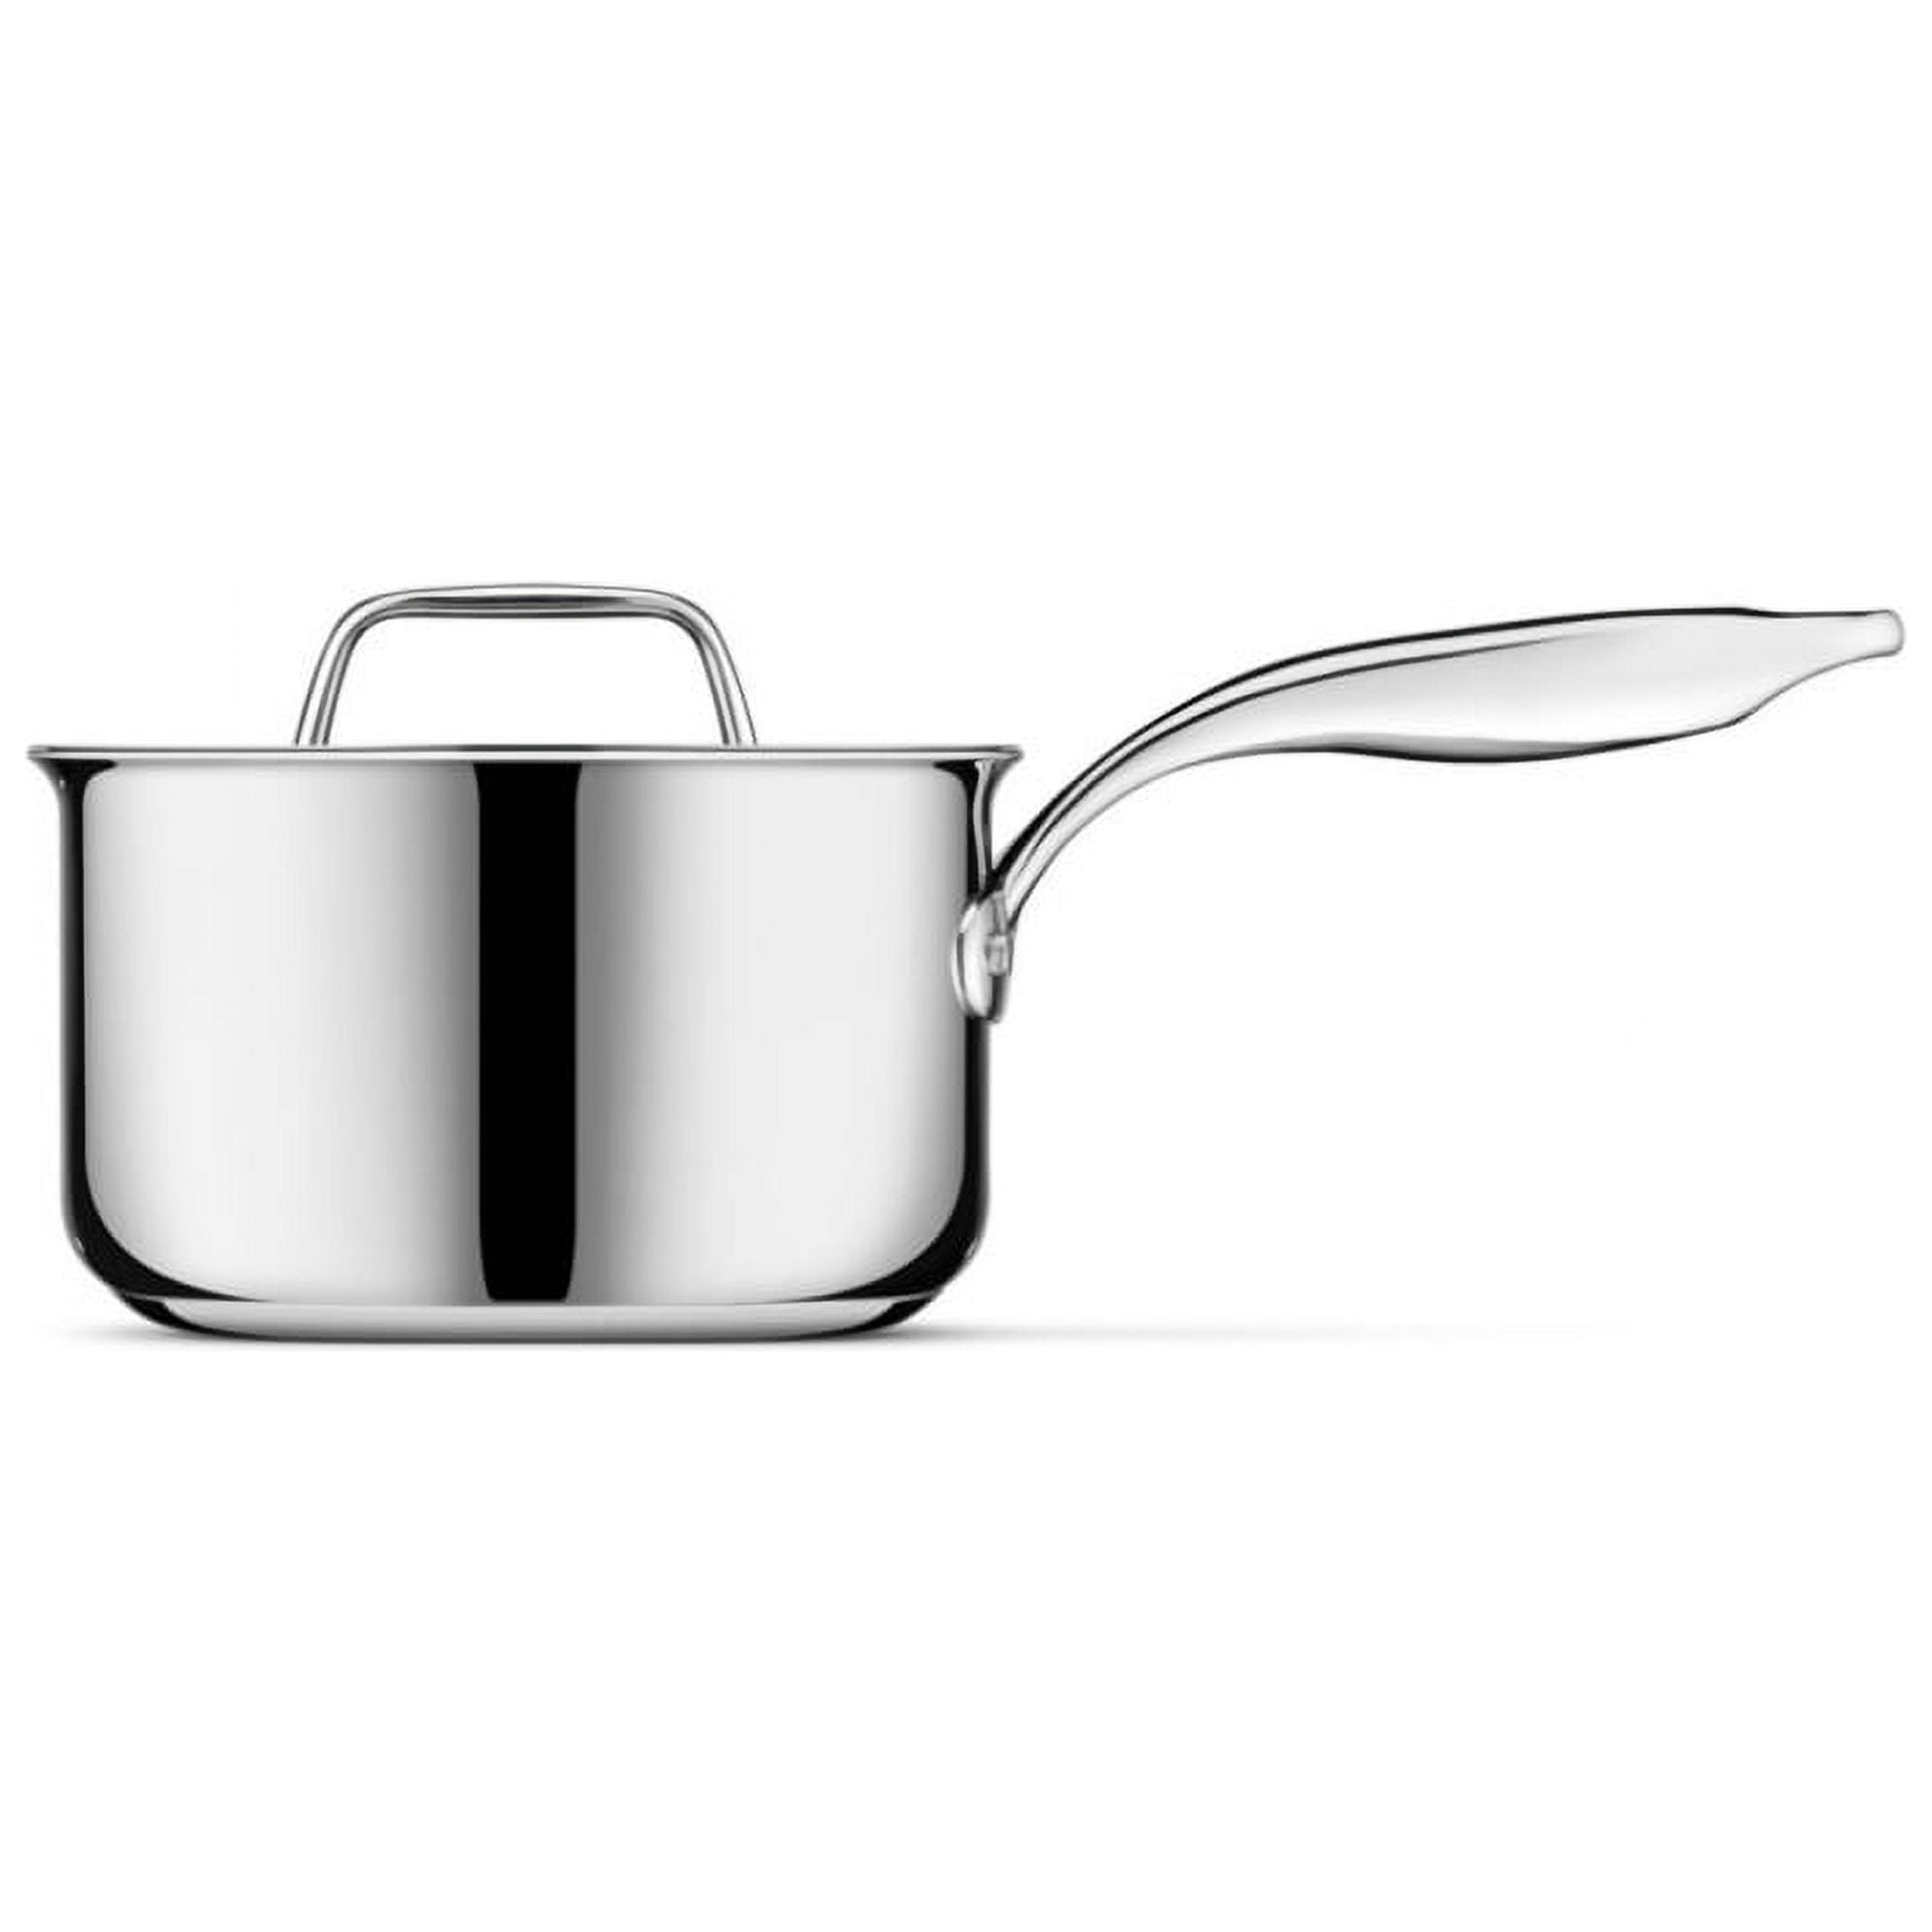  Breville Thermal Pro Stainless Steel Sauce Pan/Saucepan with Lid,  2 Quart, Silver: Home & Kitchen